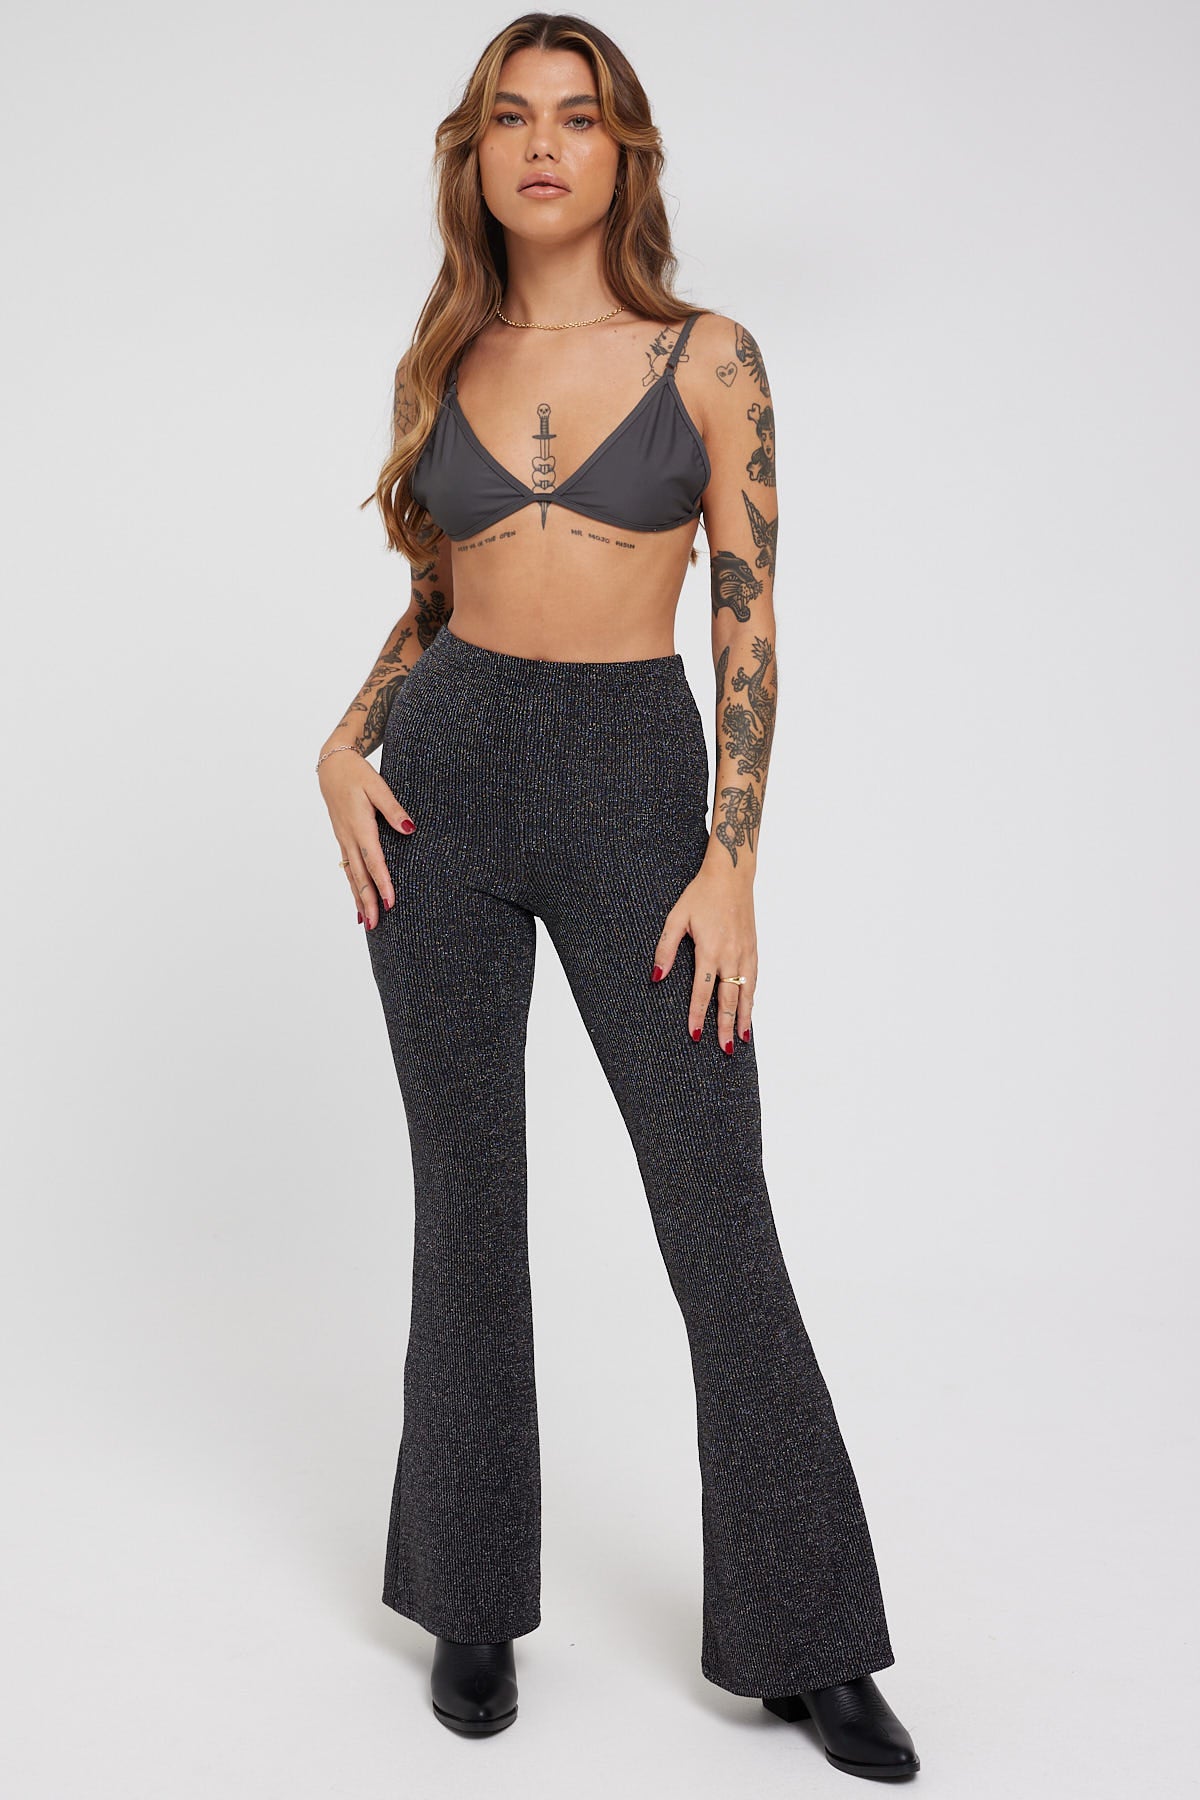 Luck & Trouble Glitter Up Knit Pant Black